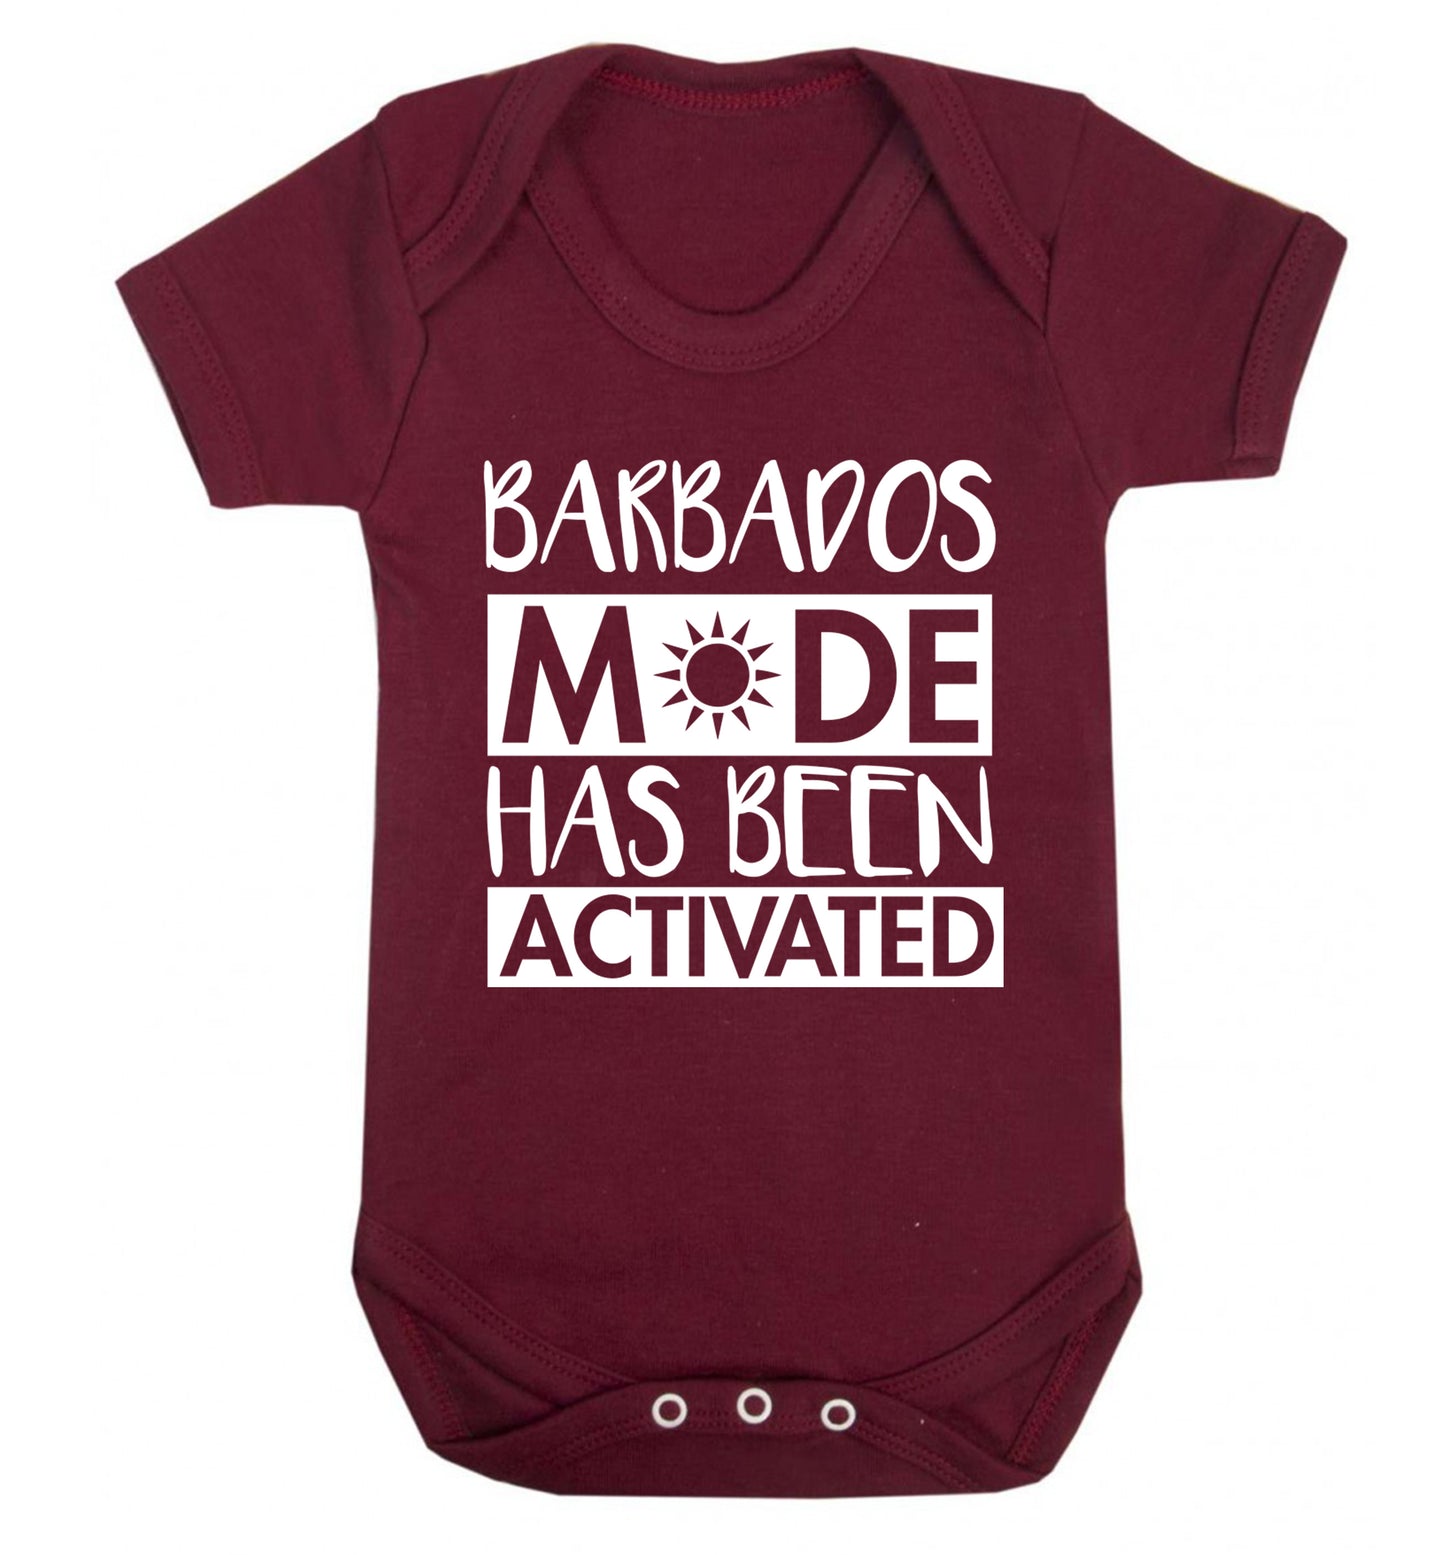 Barbados mode has been activated Baby Vest maroon 18-24 months